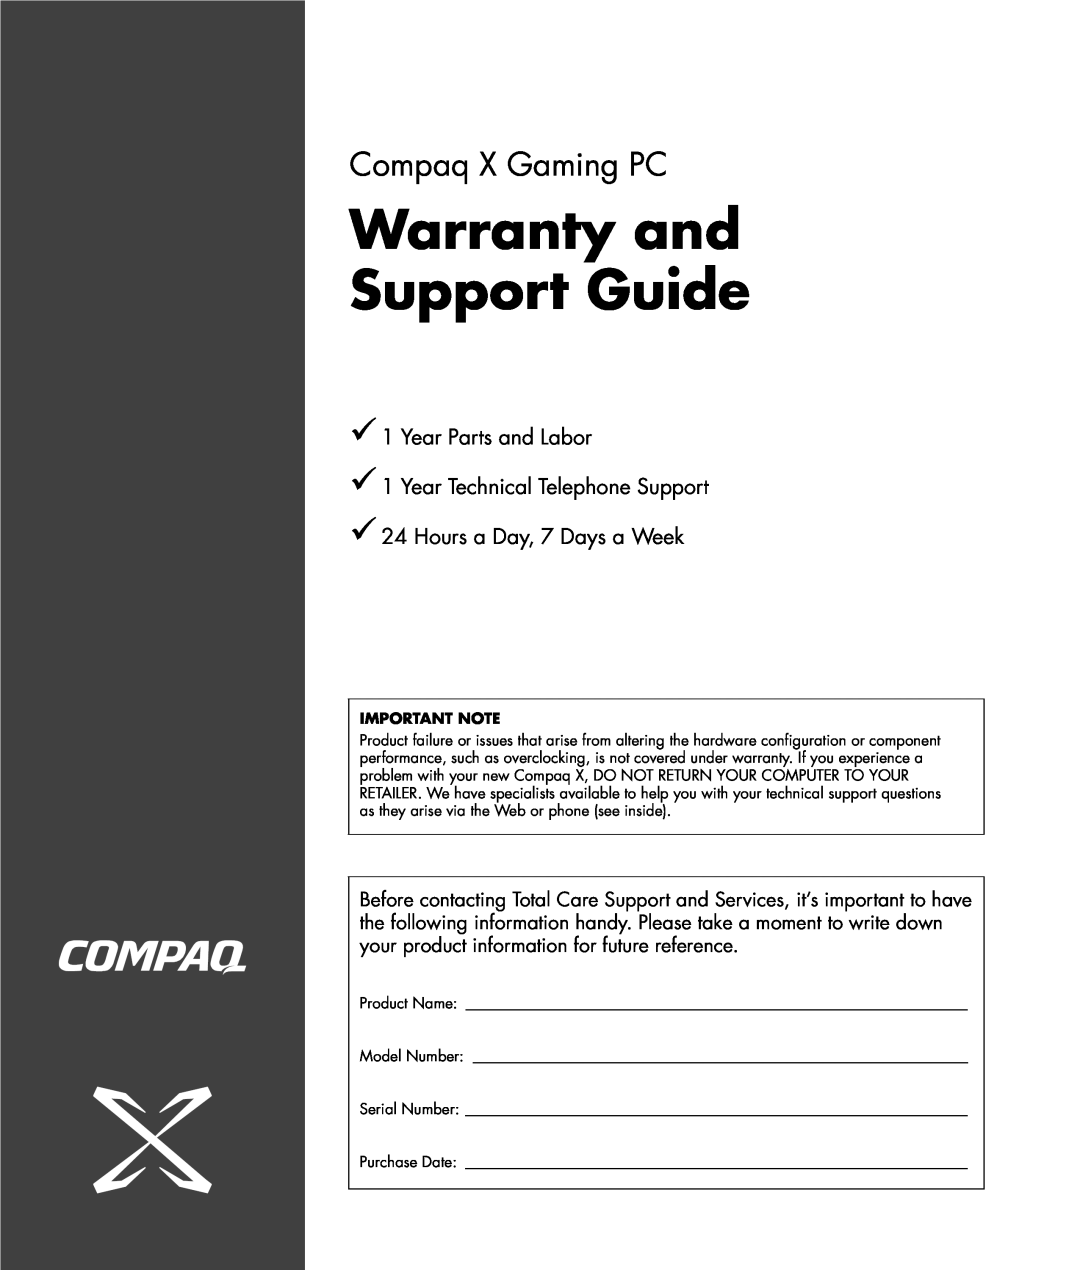 Compaq GX5000T warranty Warranty and Support Guide, Compaq X Gaming PC, Hours a Day, 7 Days a Week 